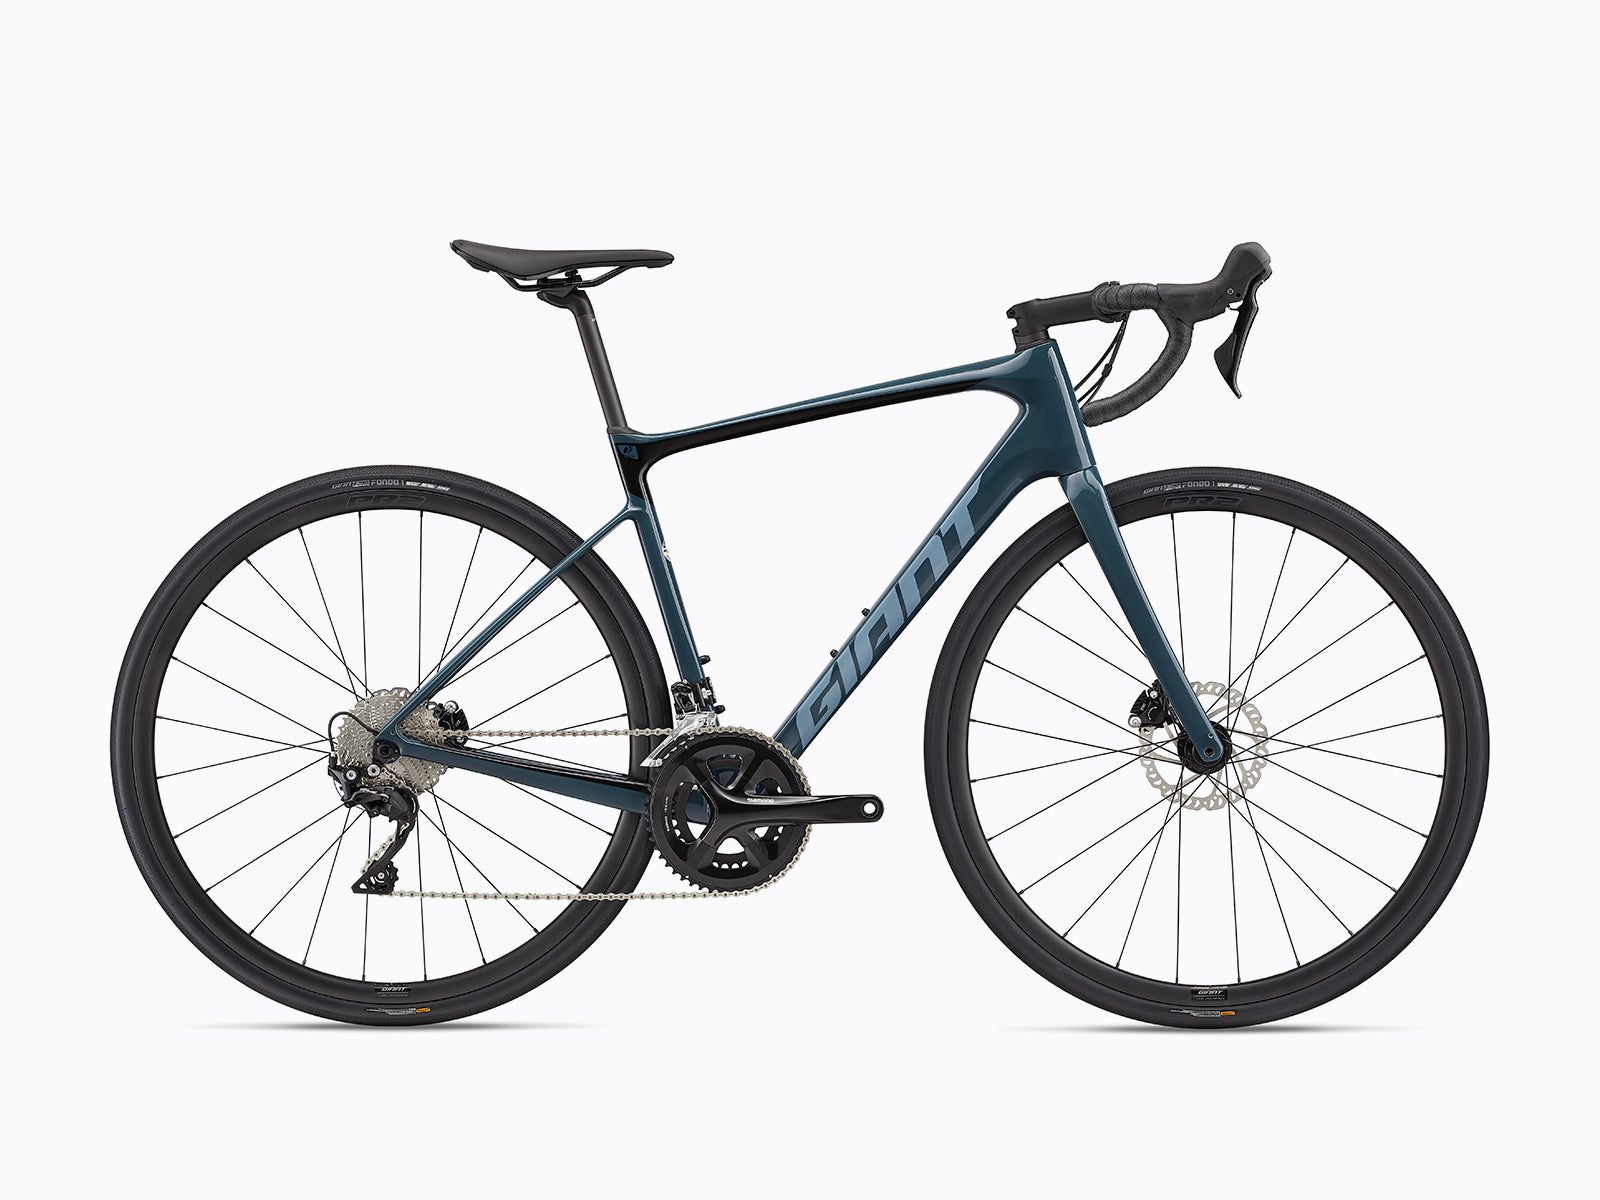 image features a Giant Defy Advanced 2, an endurance bike designed for a comfrtable riding position without loss to performance